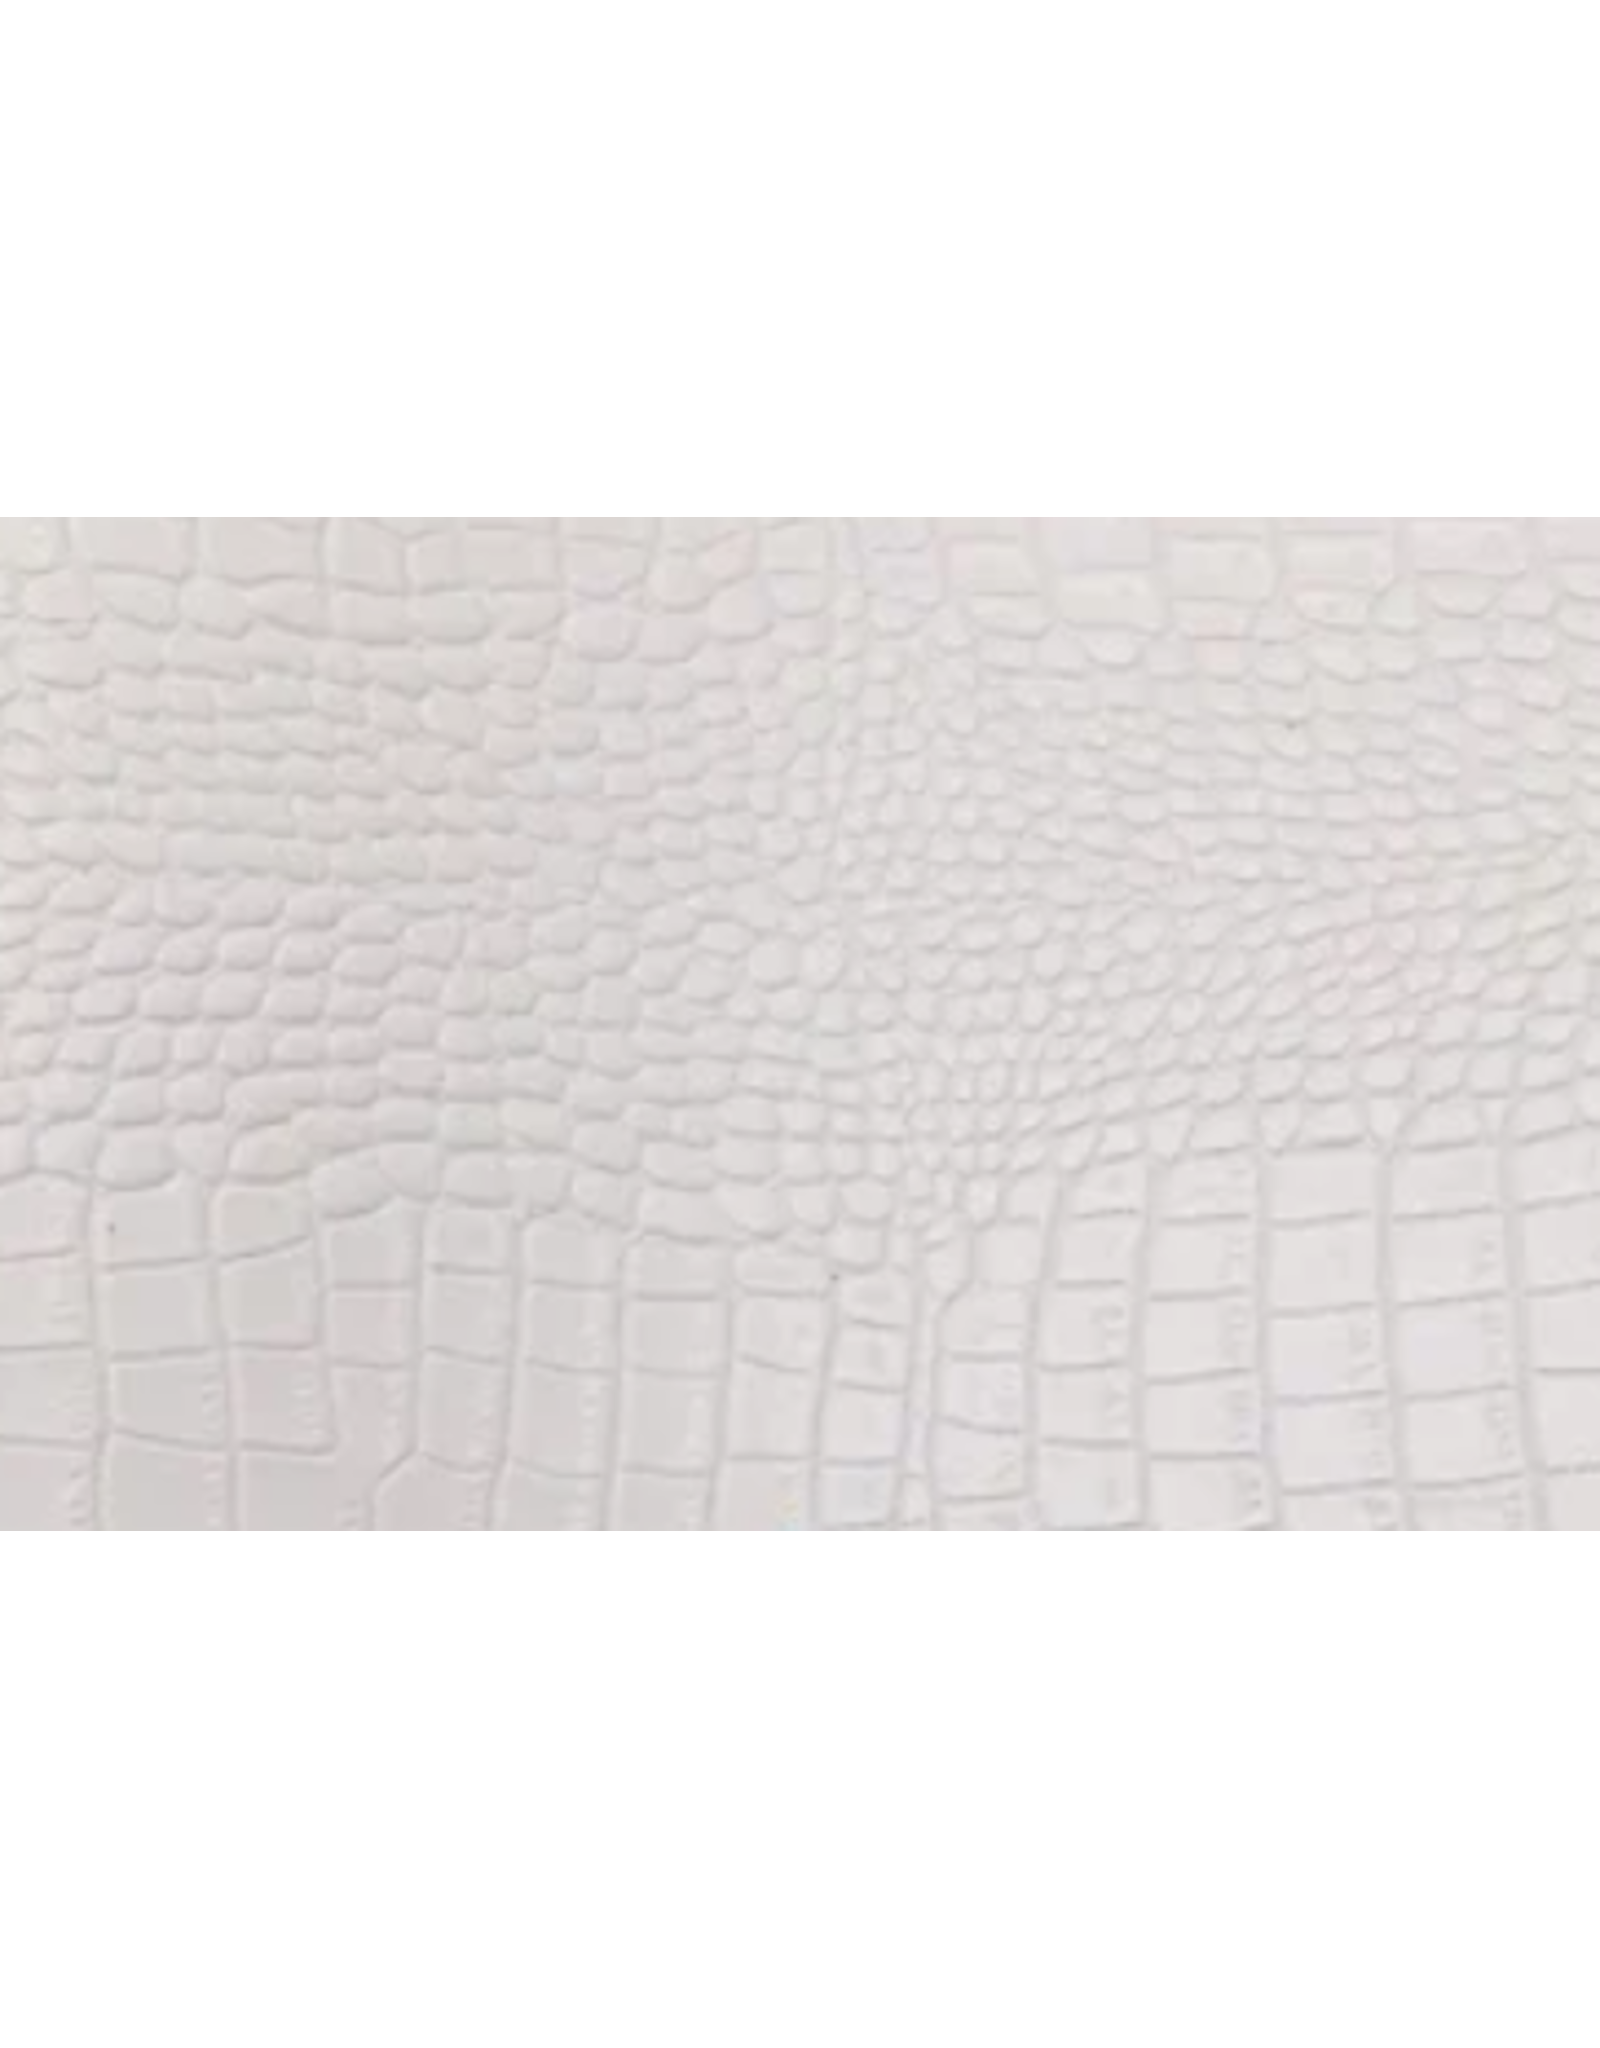 Faux Leather Beading Backing White Crocodile Skin   .8mm thick 8x11"